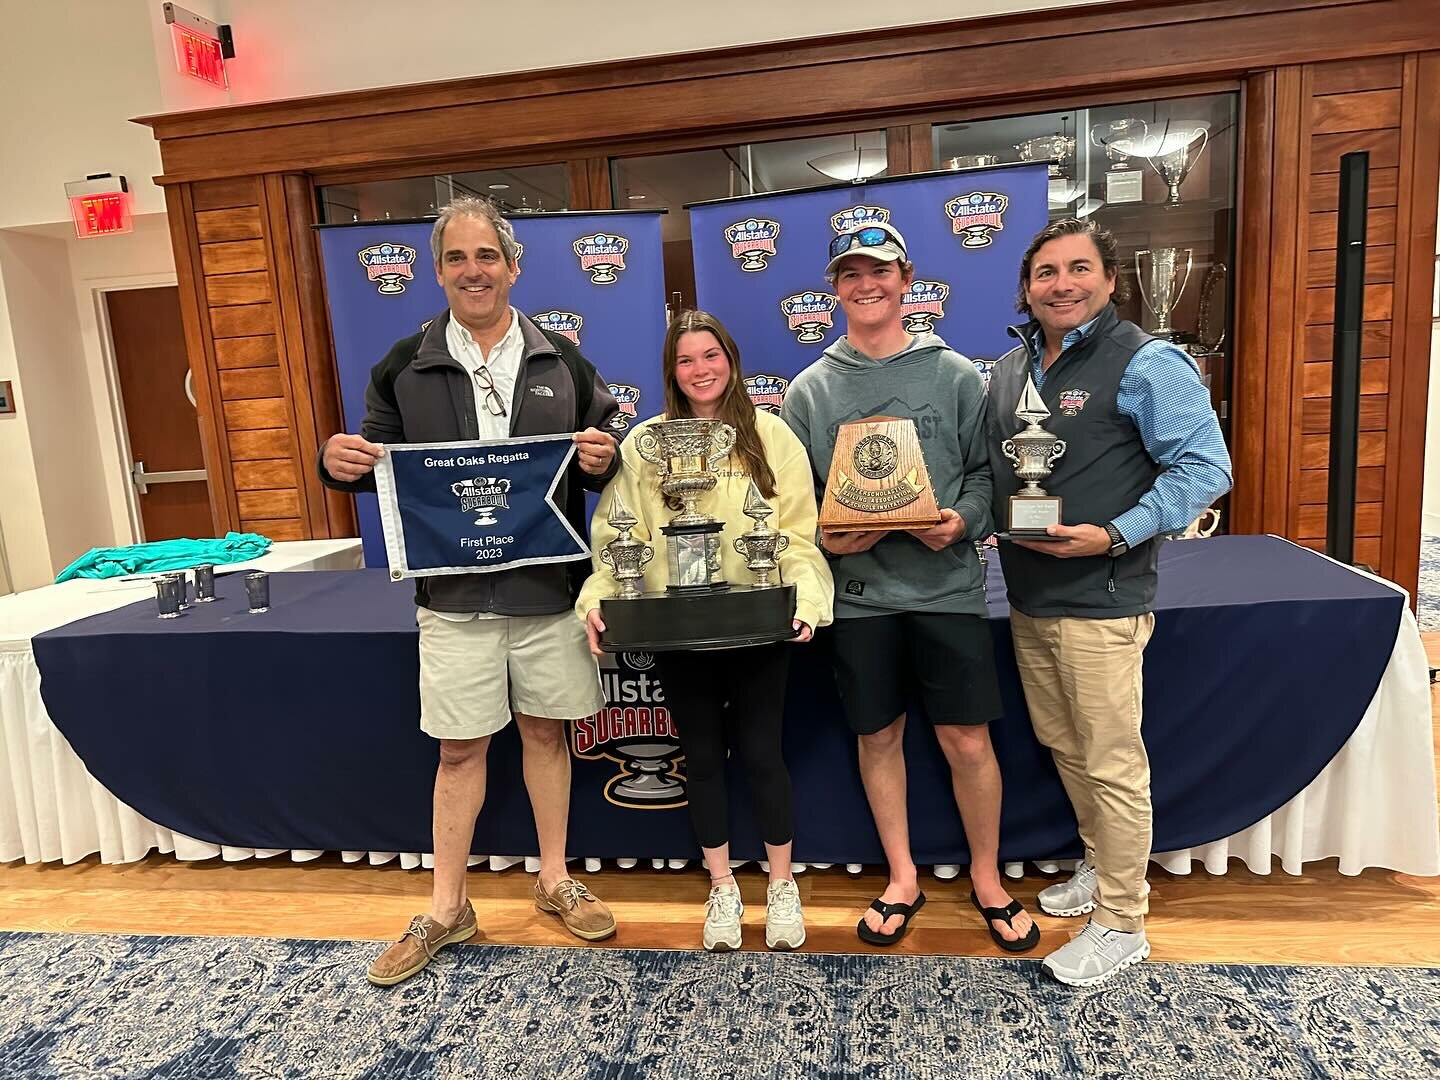 Barrington High School sailing team members Avery Guck (middle left) and Christopher Chwalk (middle right) display the trophies after Barrington won the recent Great Oaks Regatta in Louisiana.